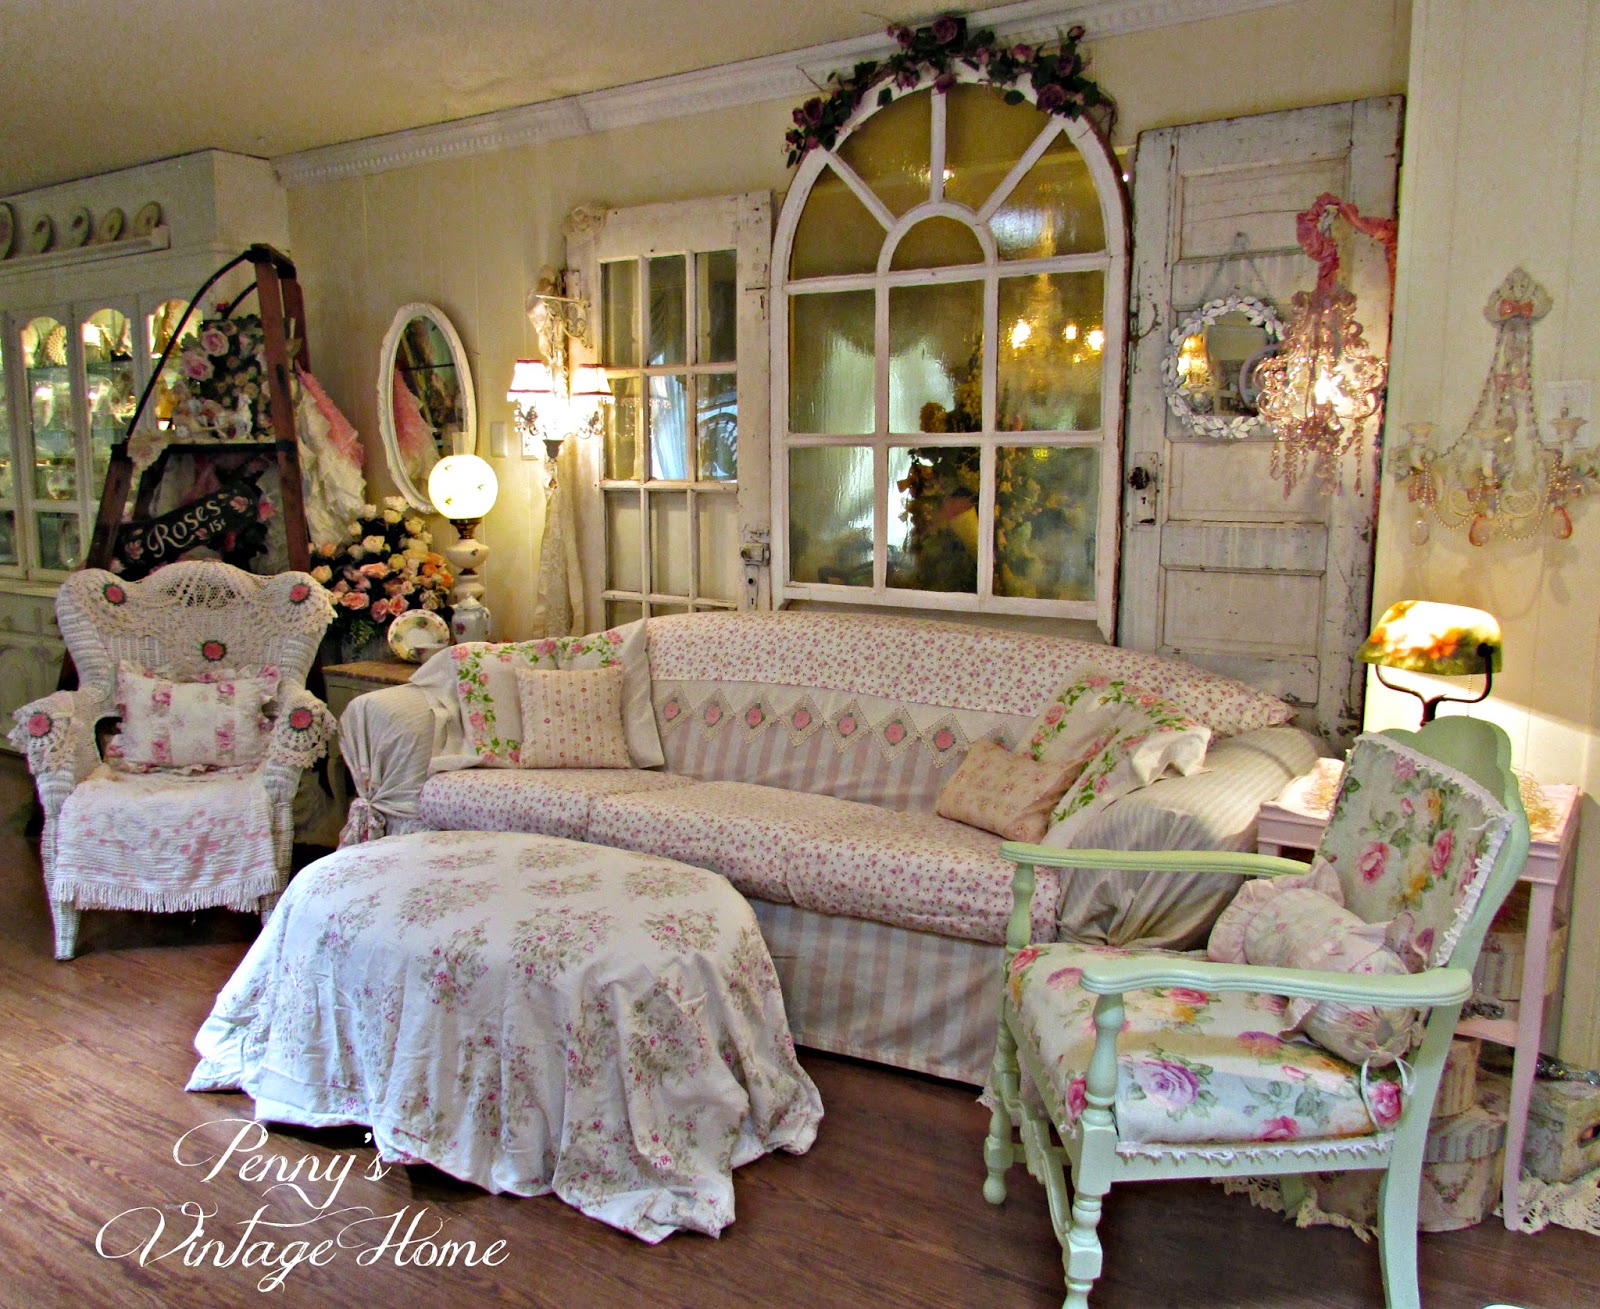 Penny's Vintage Home: Shabby Slip Covers